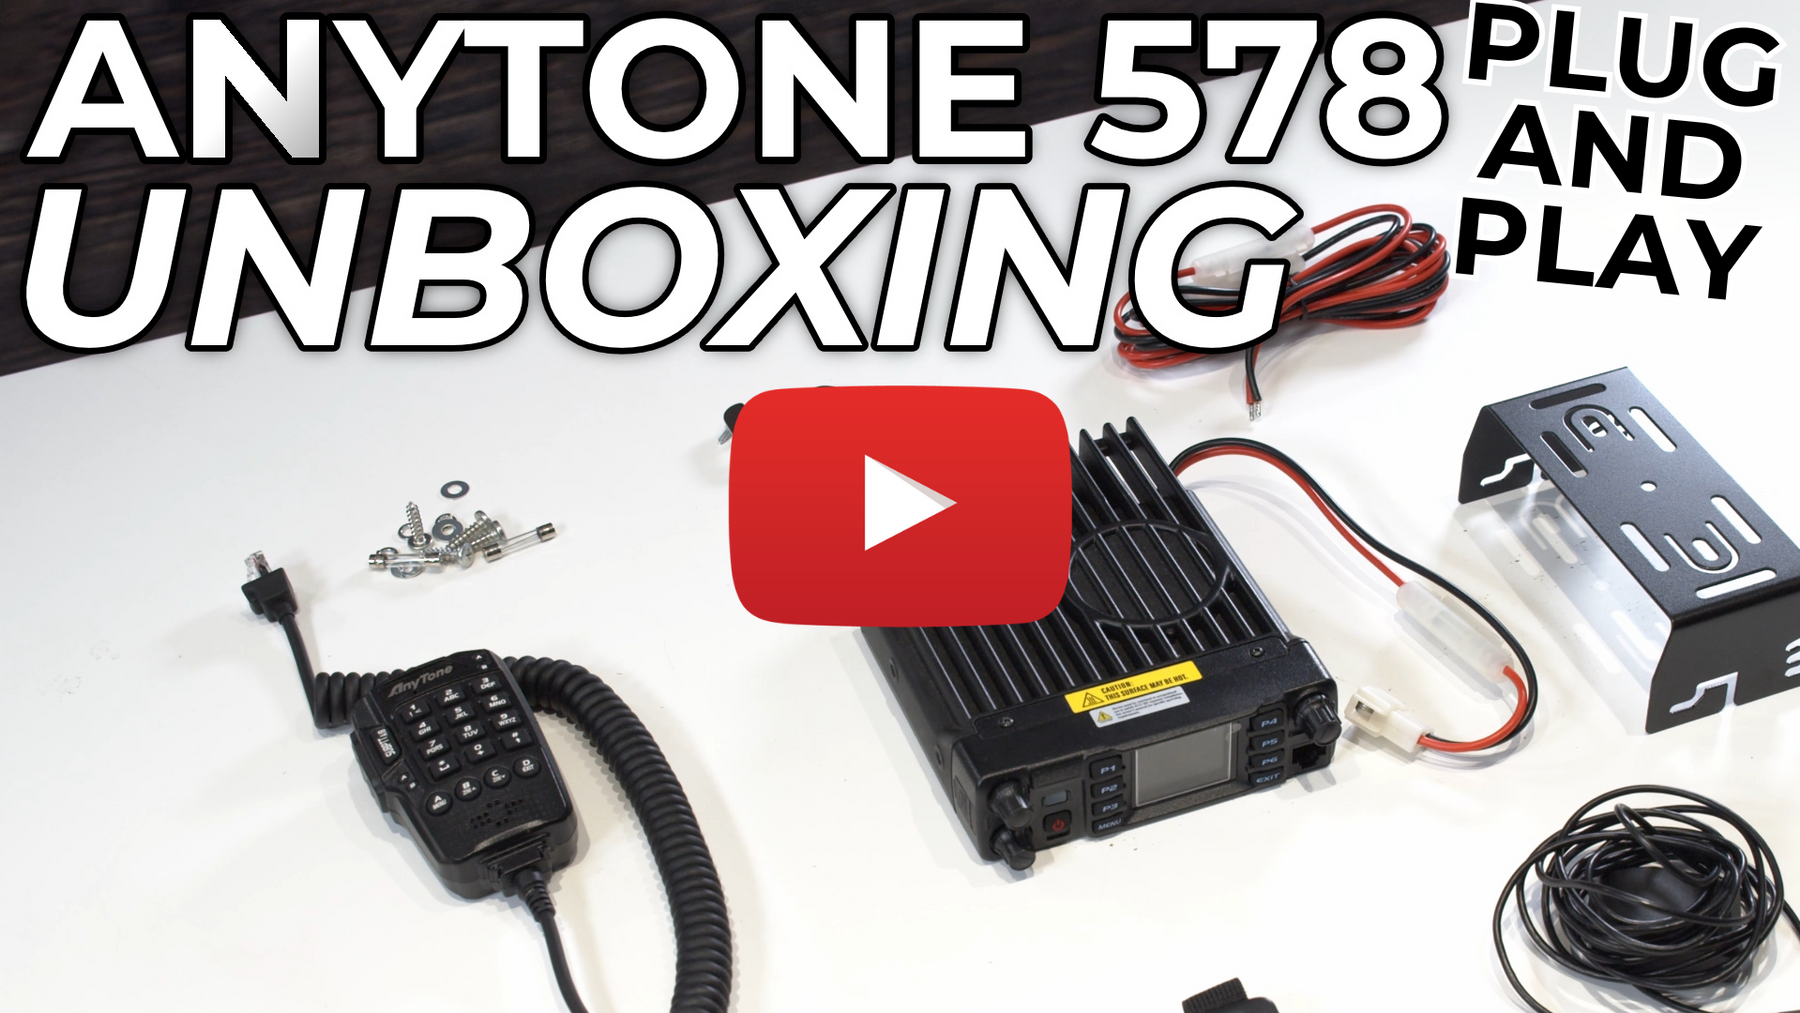 What Do You Get with the AnyTone 578 Mobile Plug and Play Package?